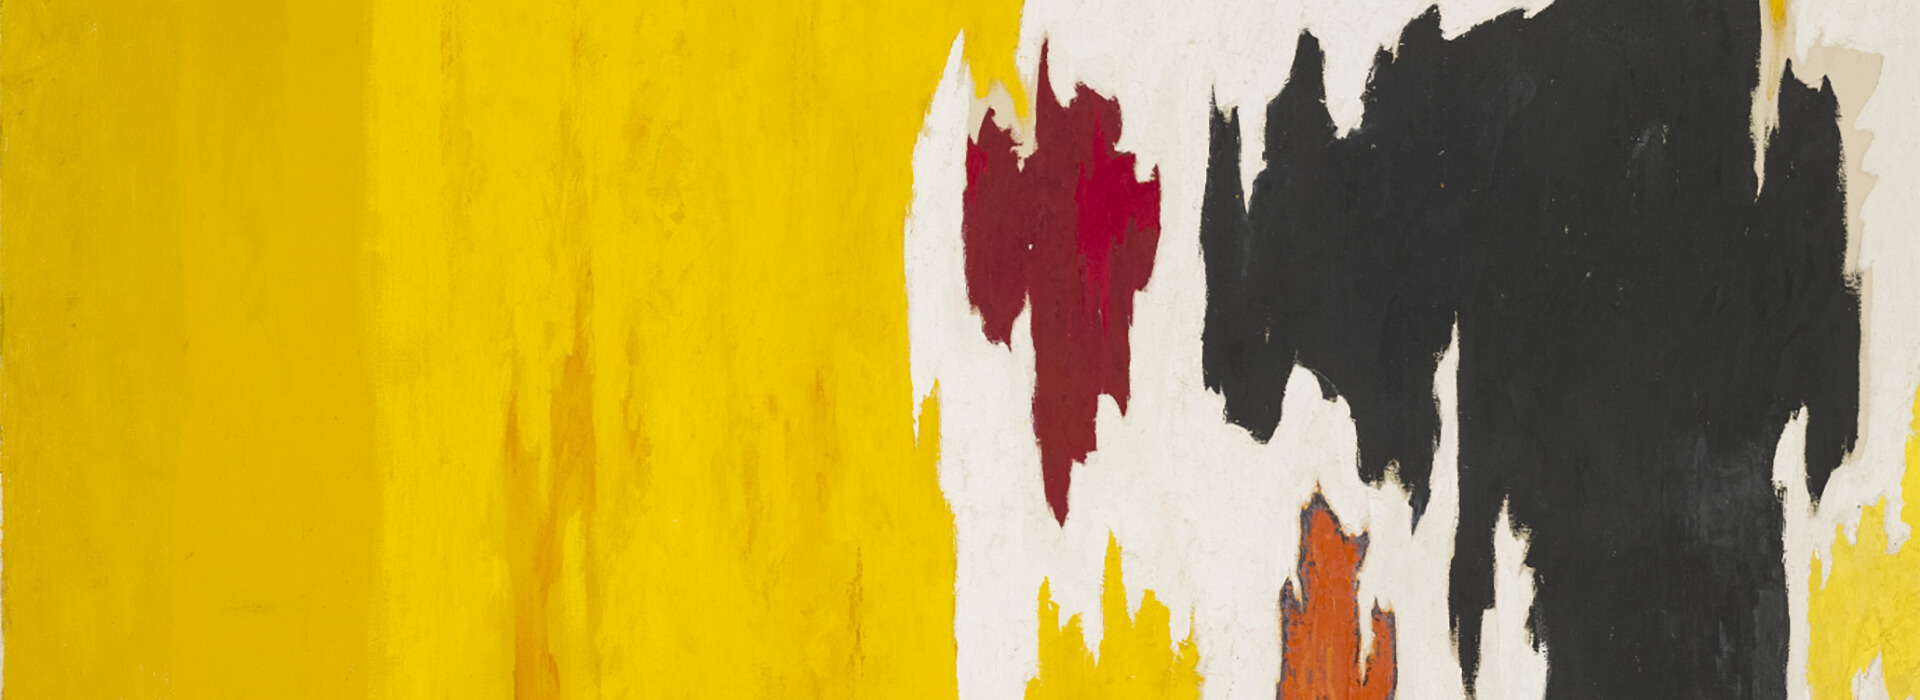 Detail of an abstract yellow, black, red, orange and white painting